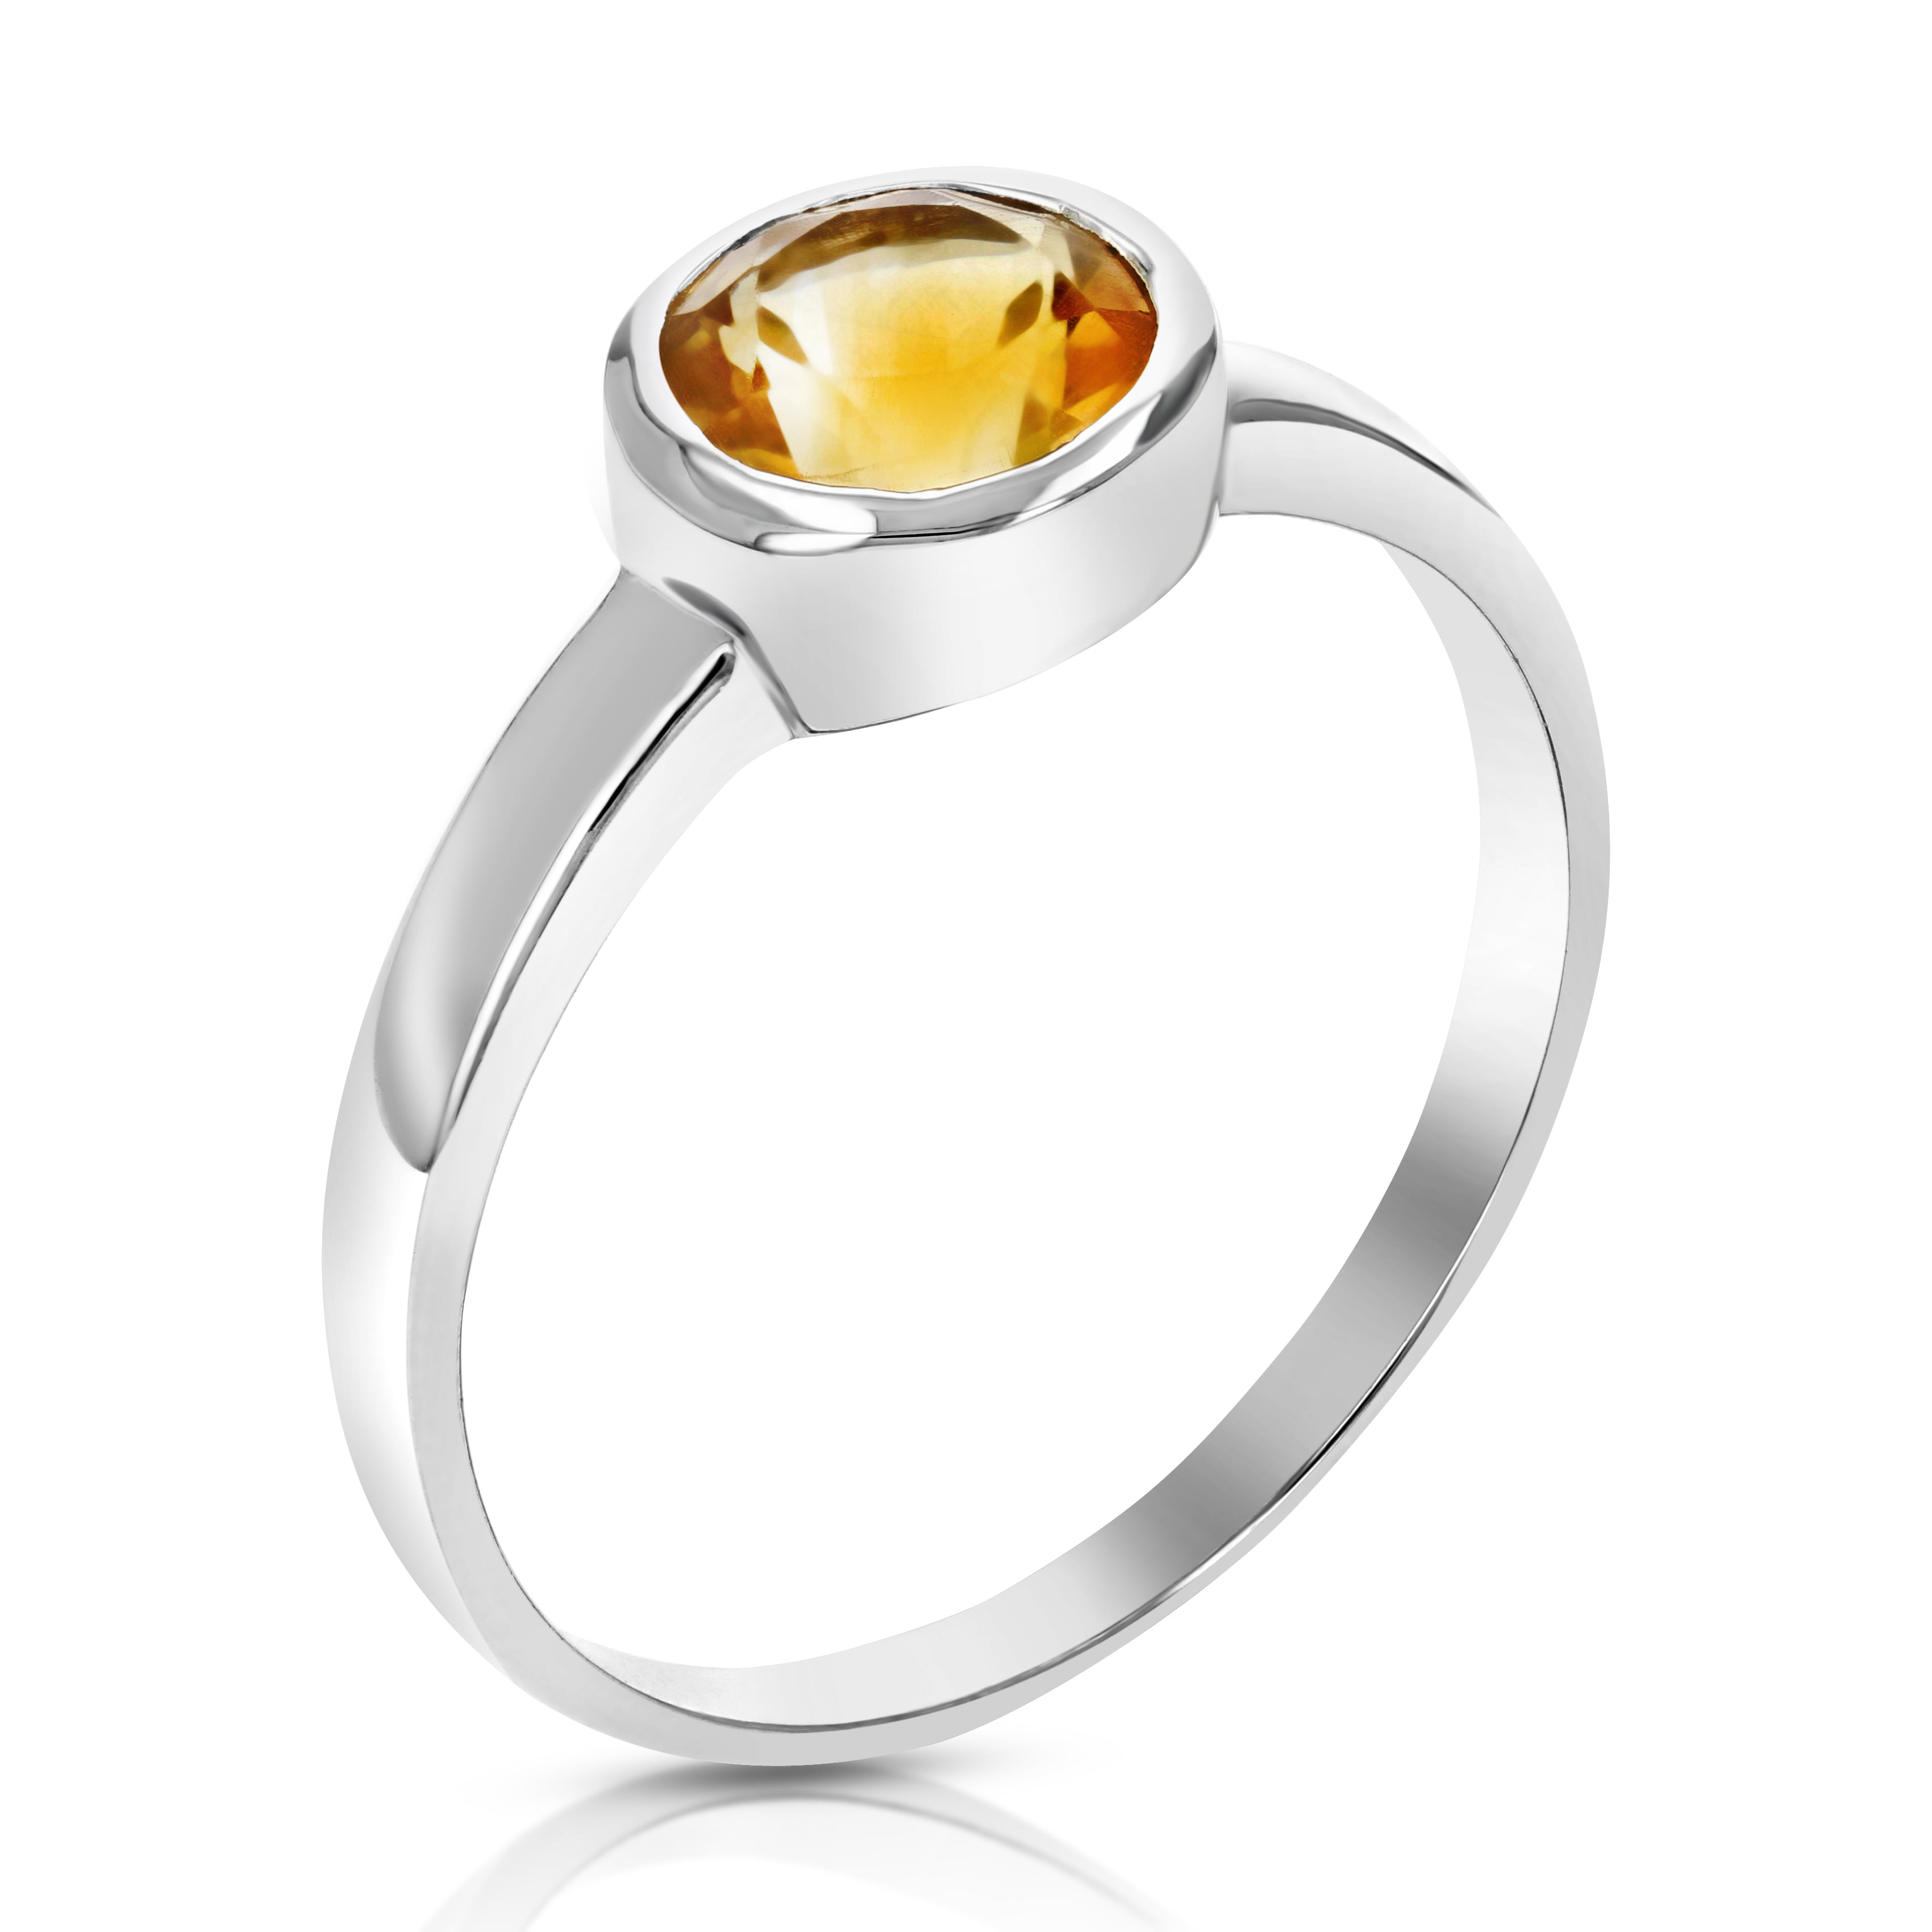 SVC-JEWELS 14K Yellow Gold Over 925 Sterling Silver Round Cut Citrine Criss Cross X Wedding Band Ring Men 